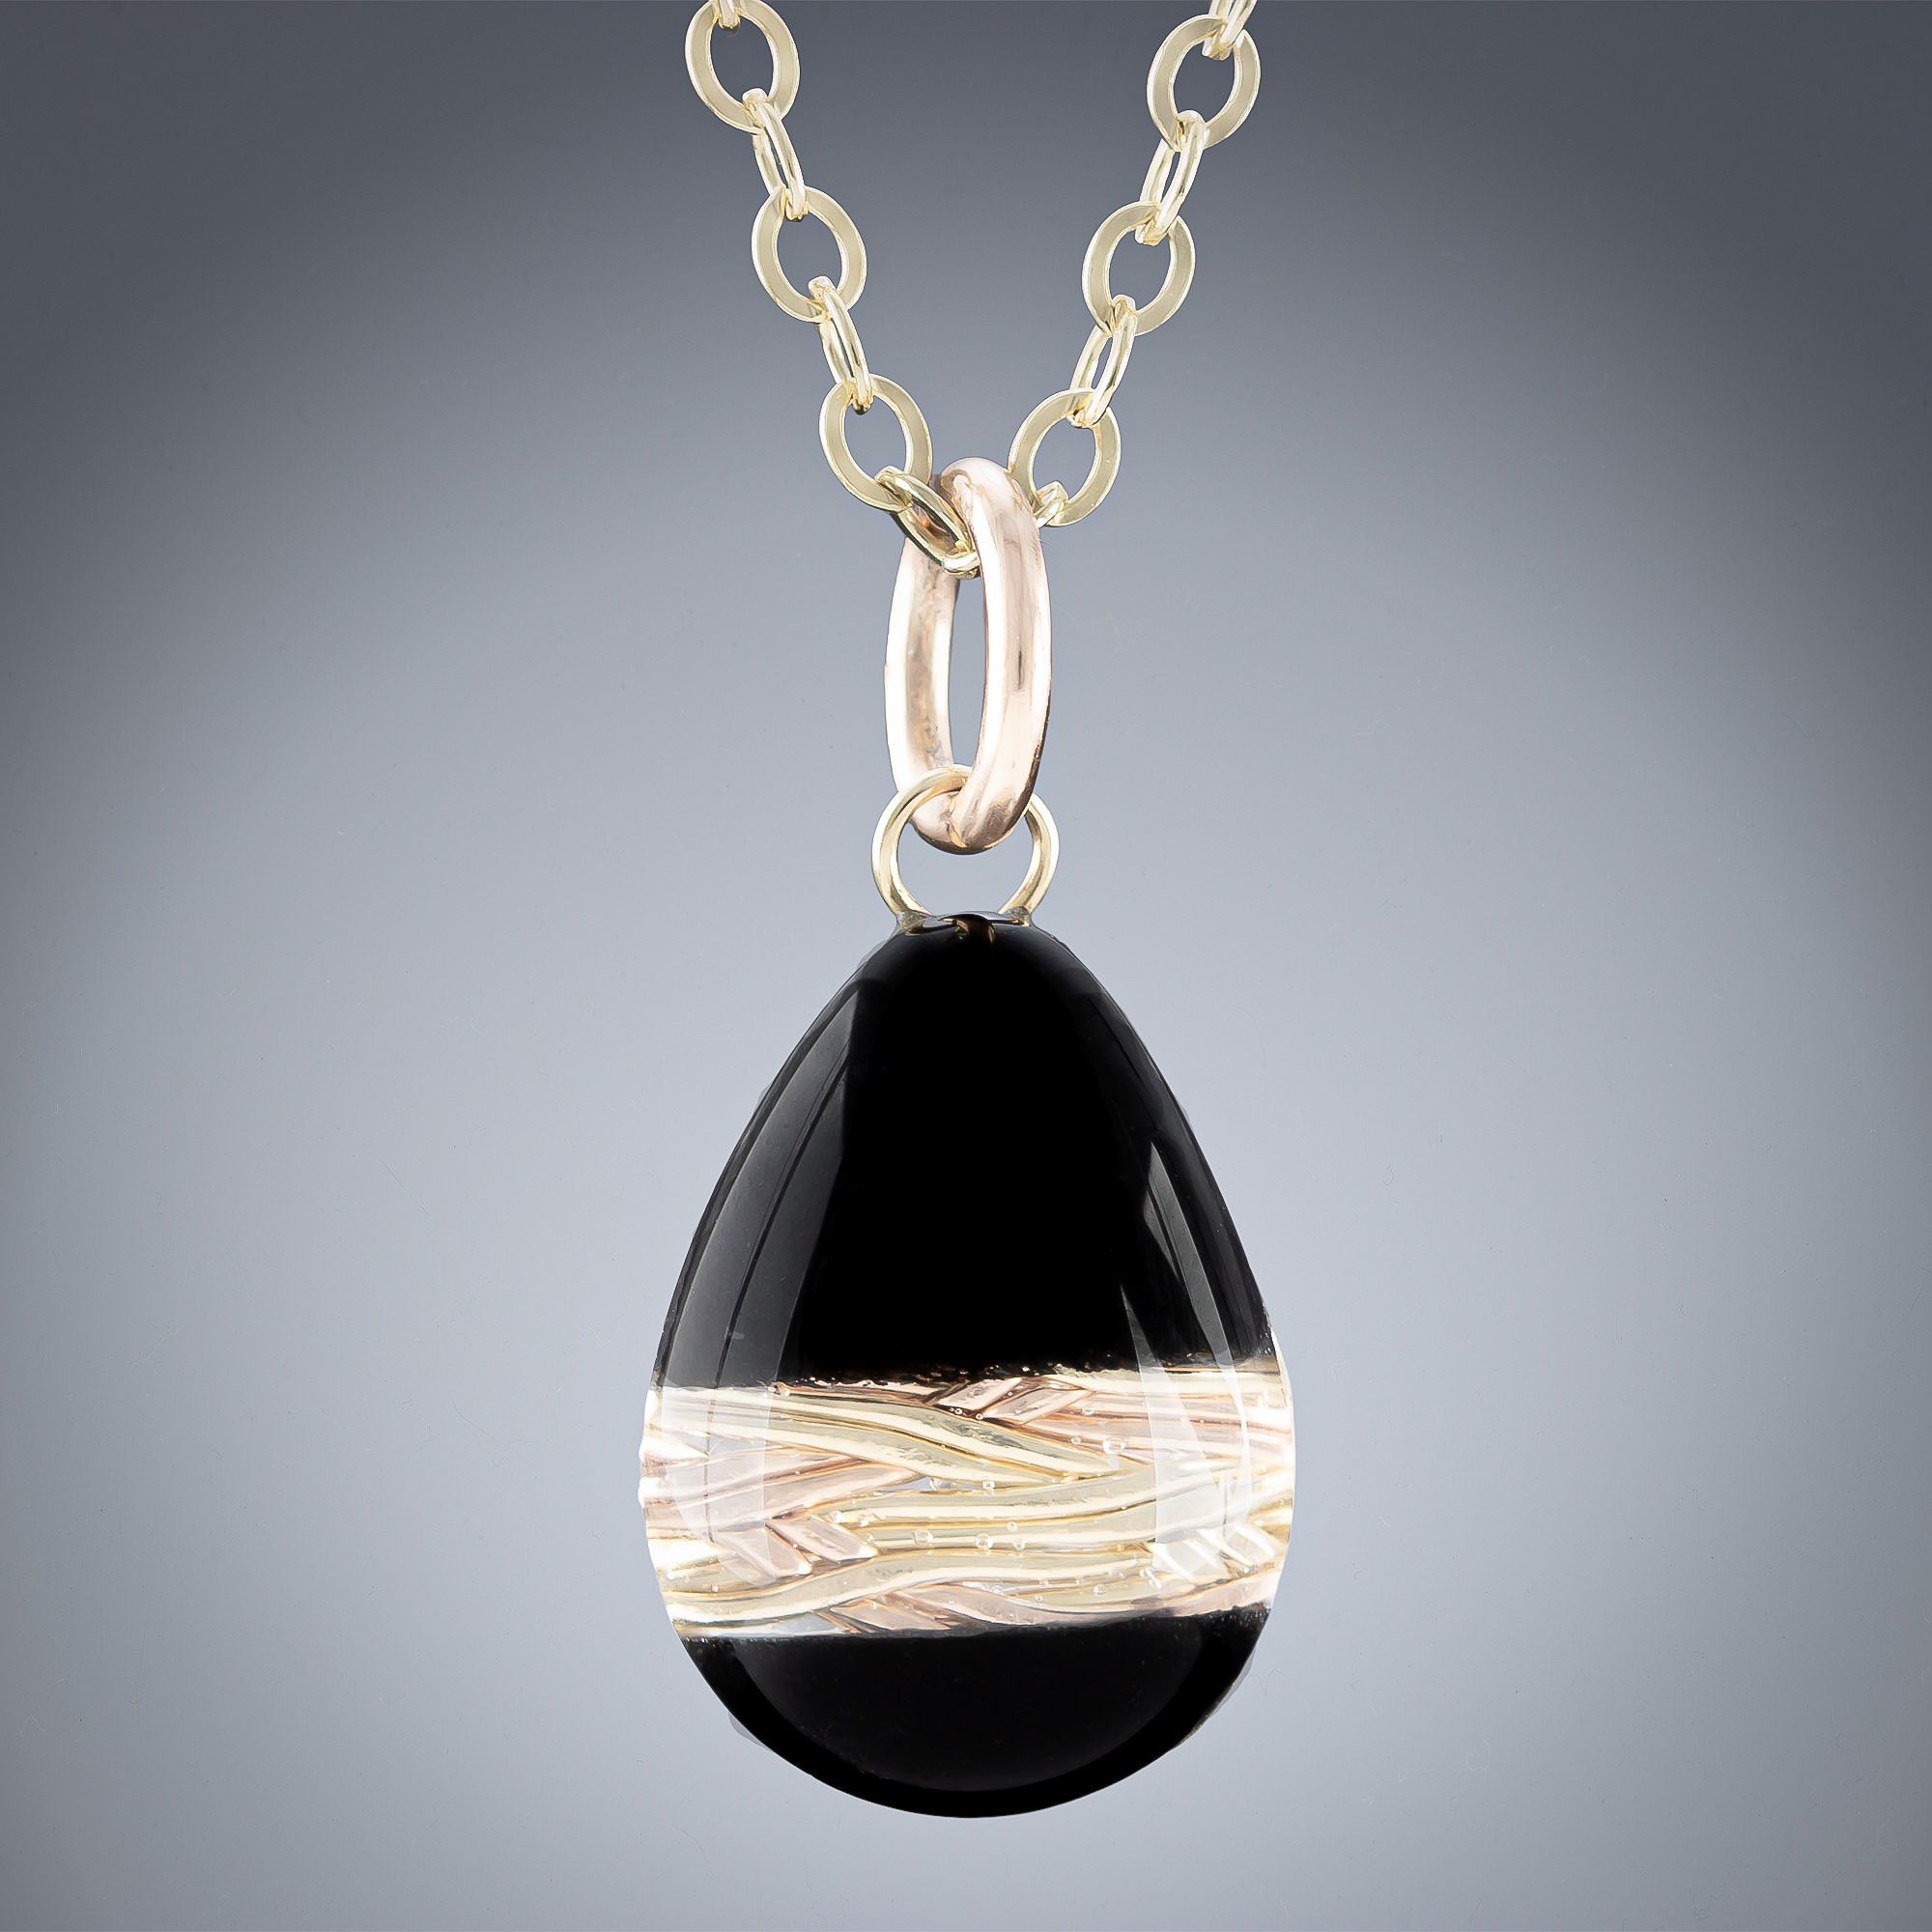 Dainty Handwoven Gold and Black Enamel Teardrop Pendant Necklace in both 14K Yellow and Rose Gold Fill